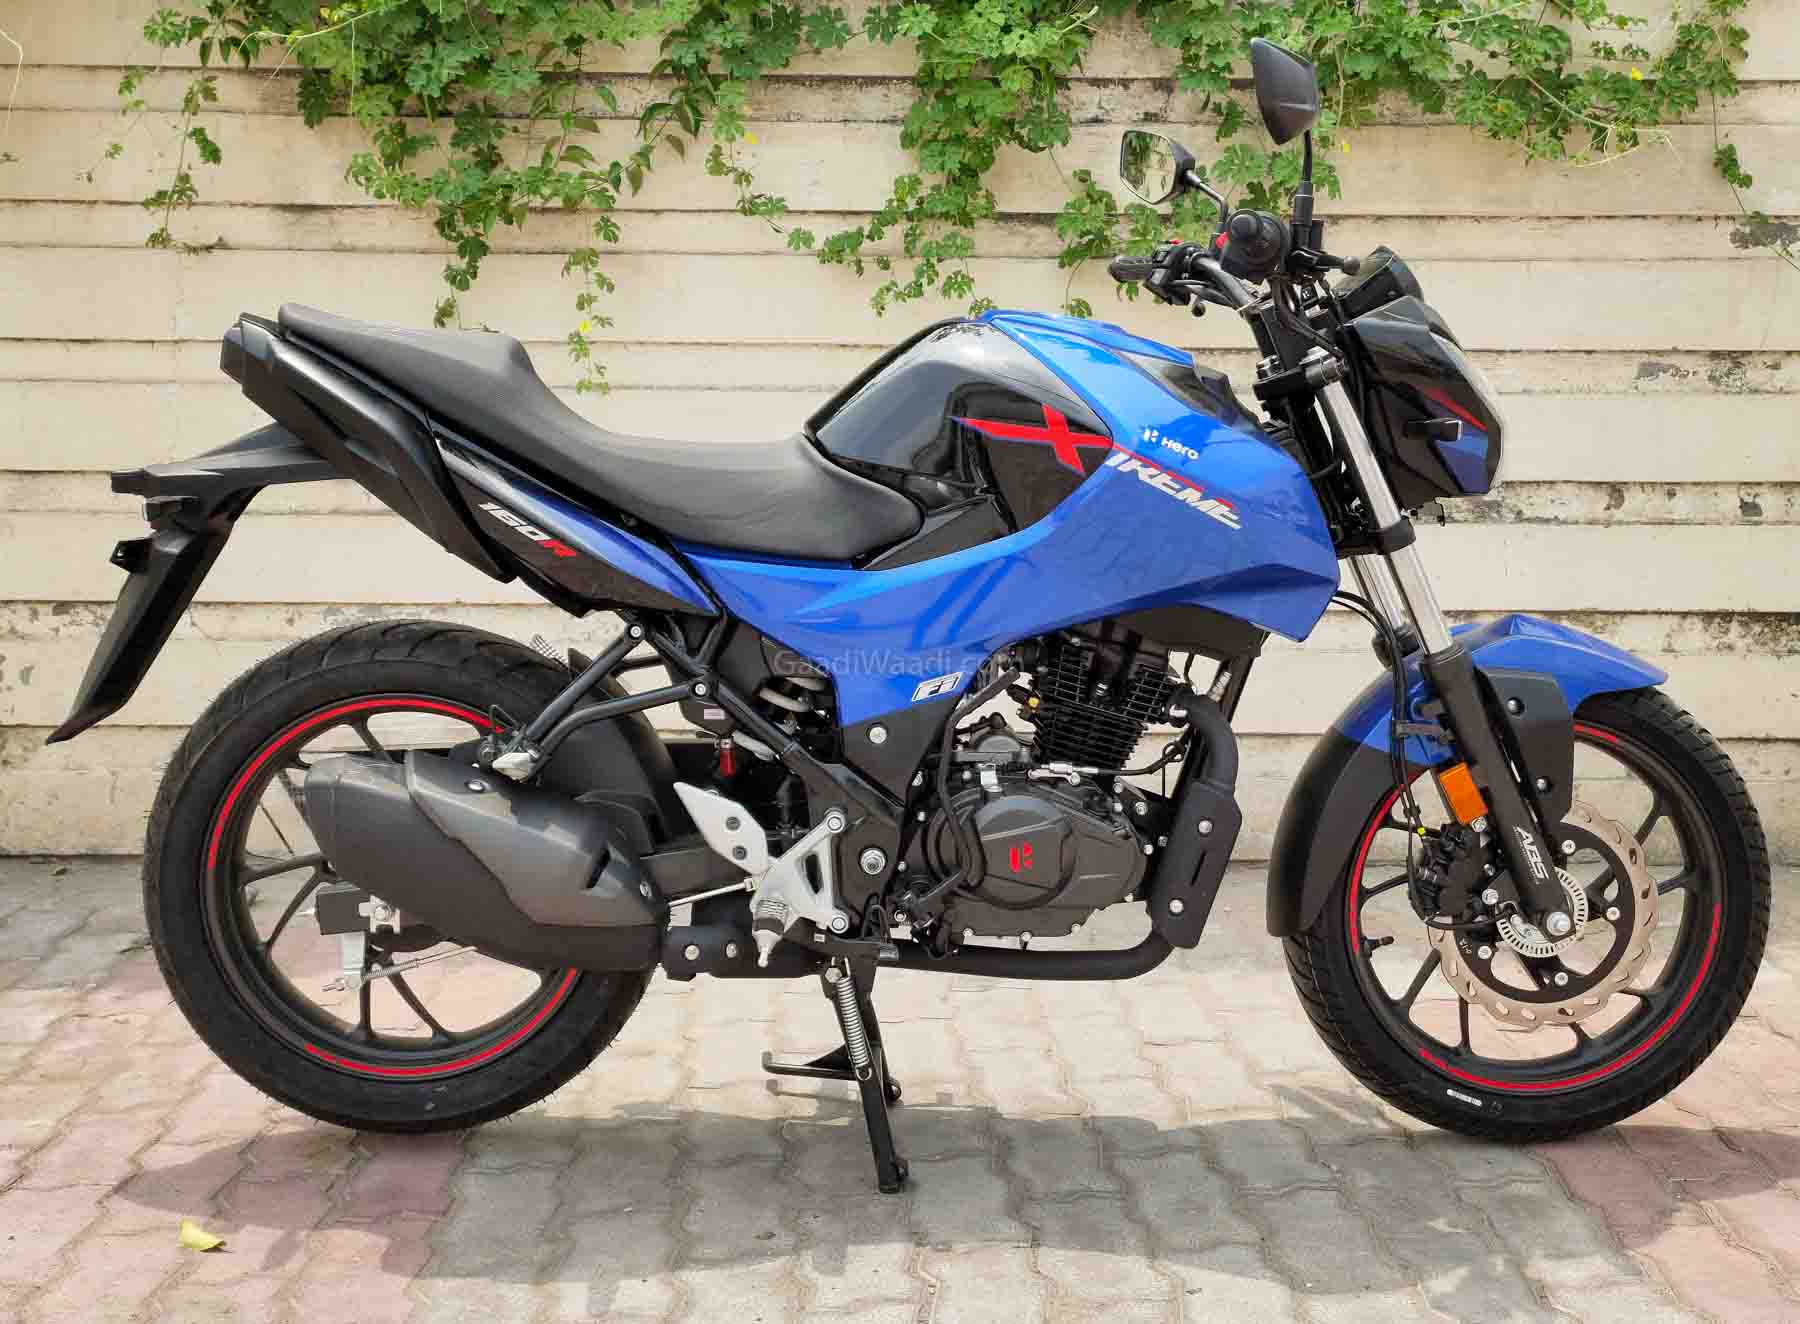 Hero Xtreme 160r Price Cheaper Than Retail Price Buy Clothing Accessories And Lifestyle Products For Women Men